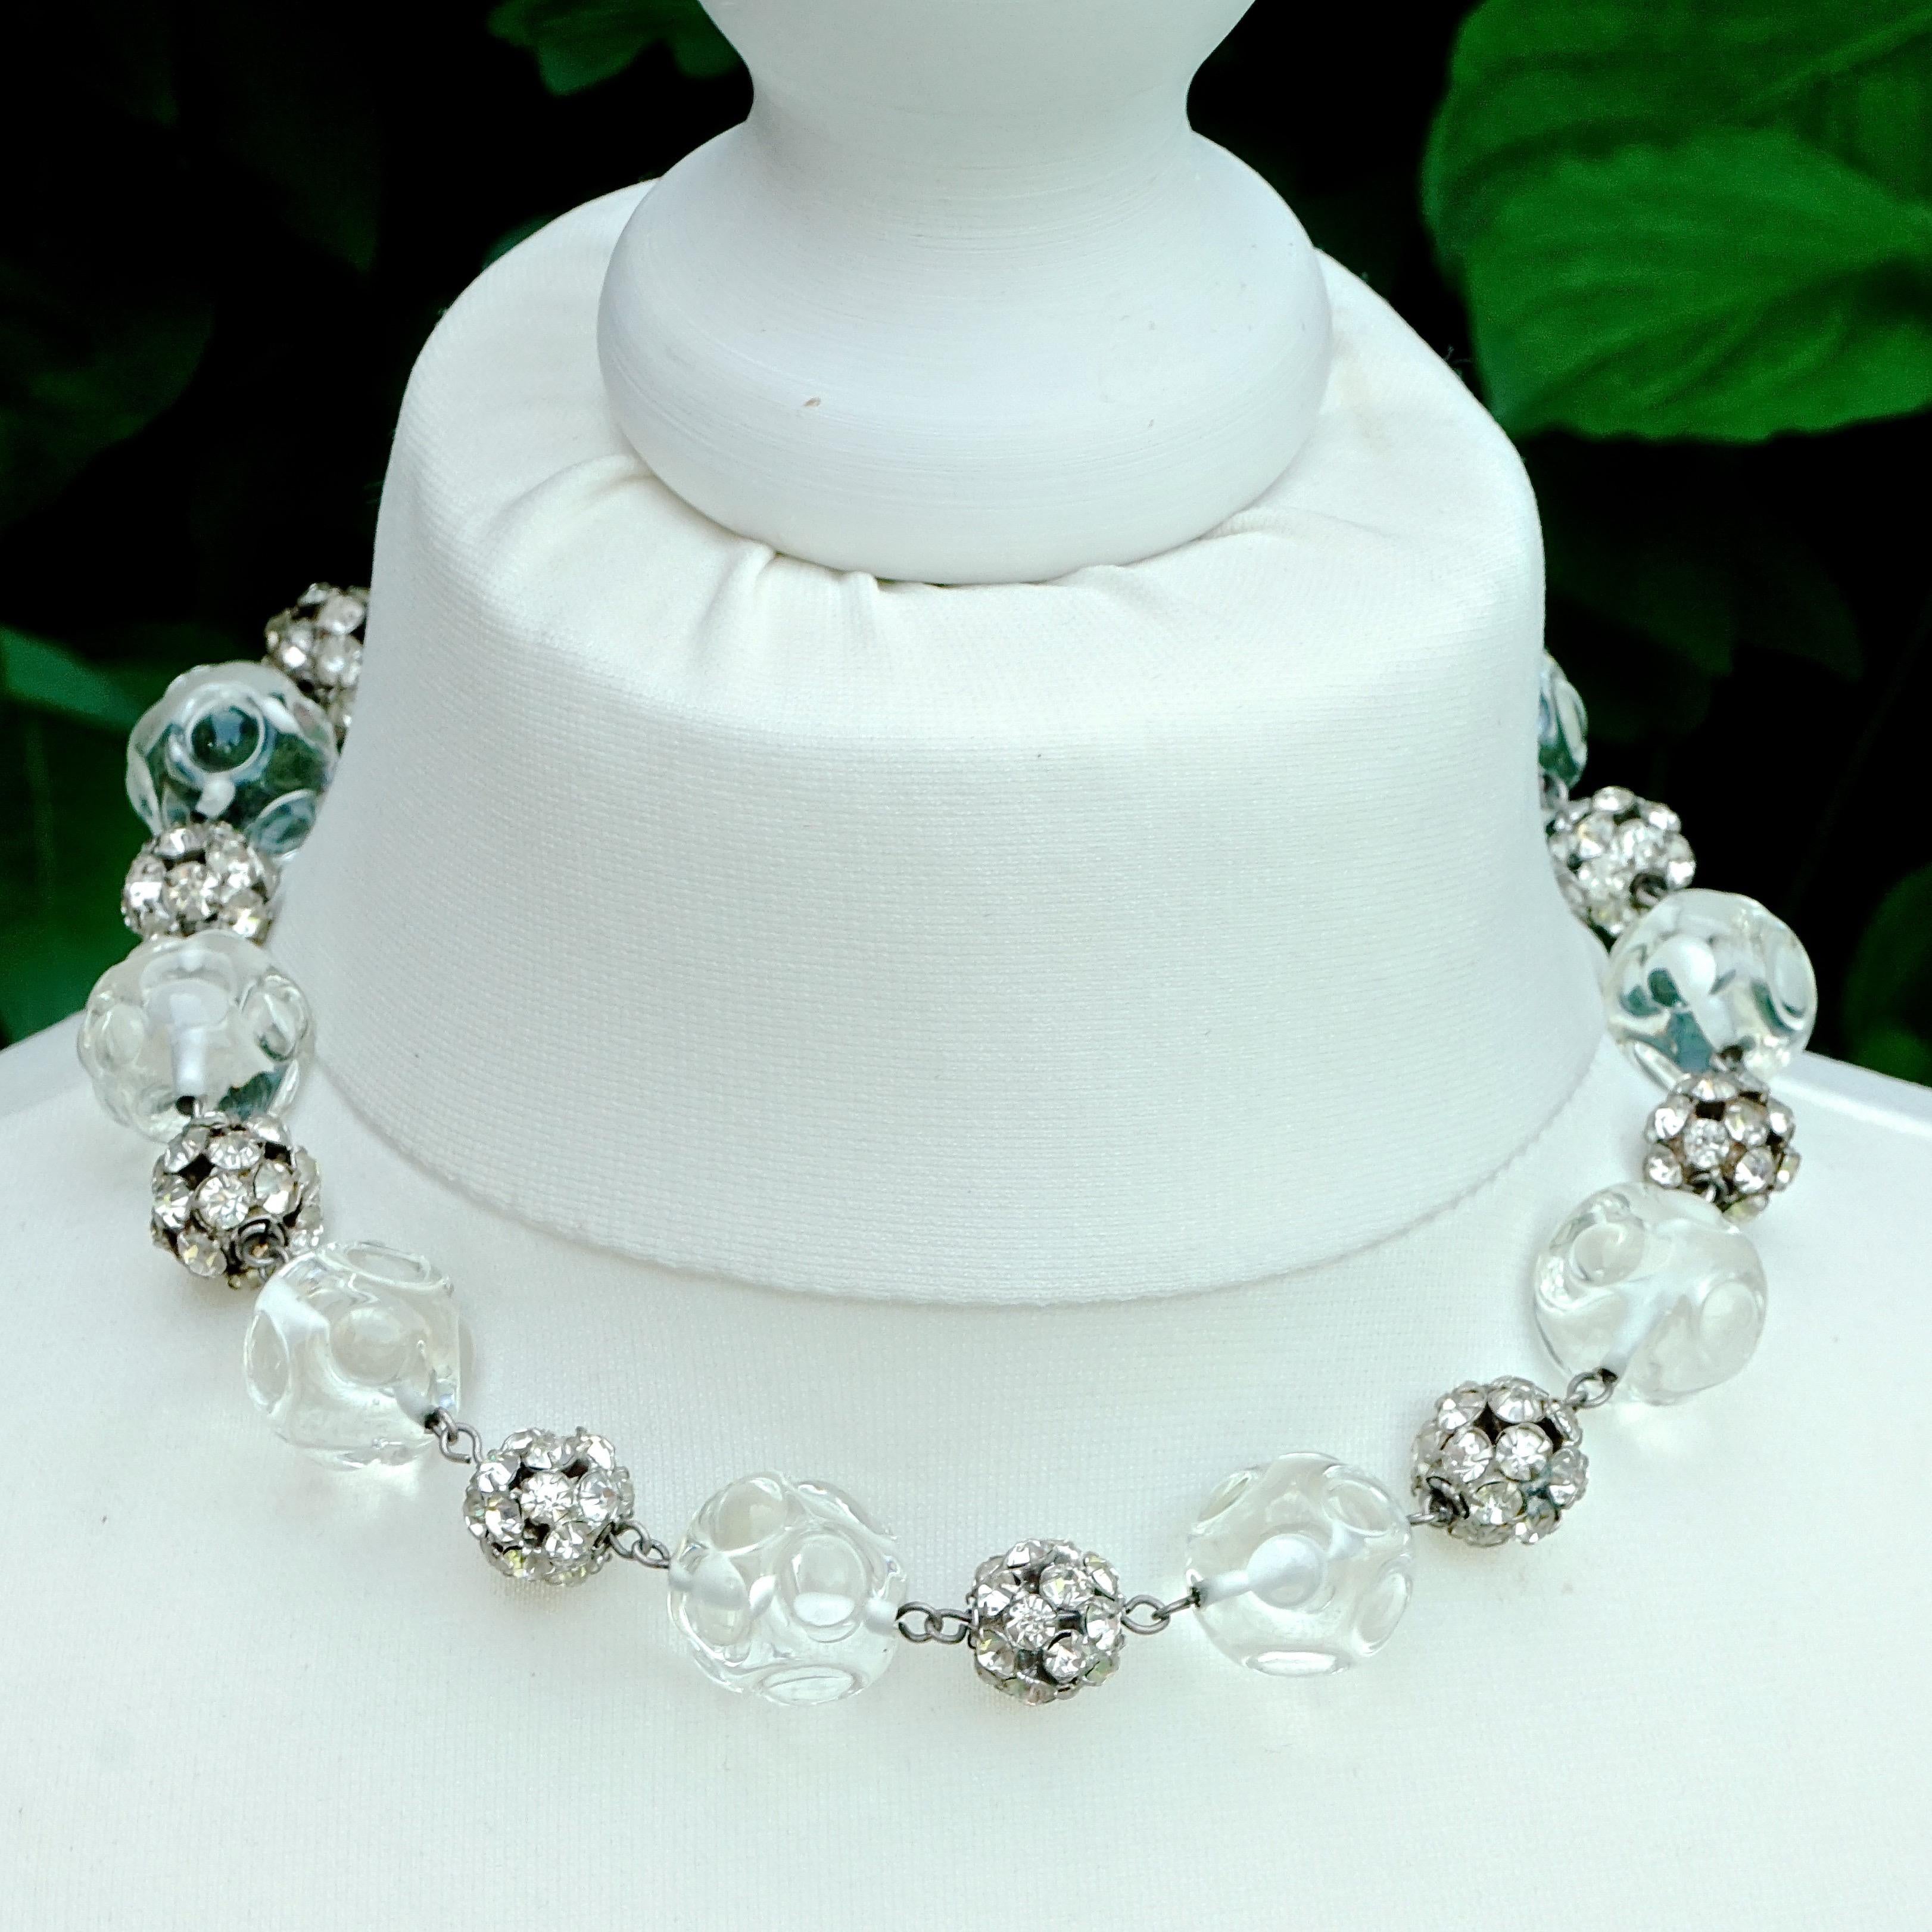 Art Deco Necklace with Clear Glass and Rhinestone Ball Beads on Silver Tone Wire In Good Condition For Sale In London, GB